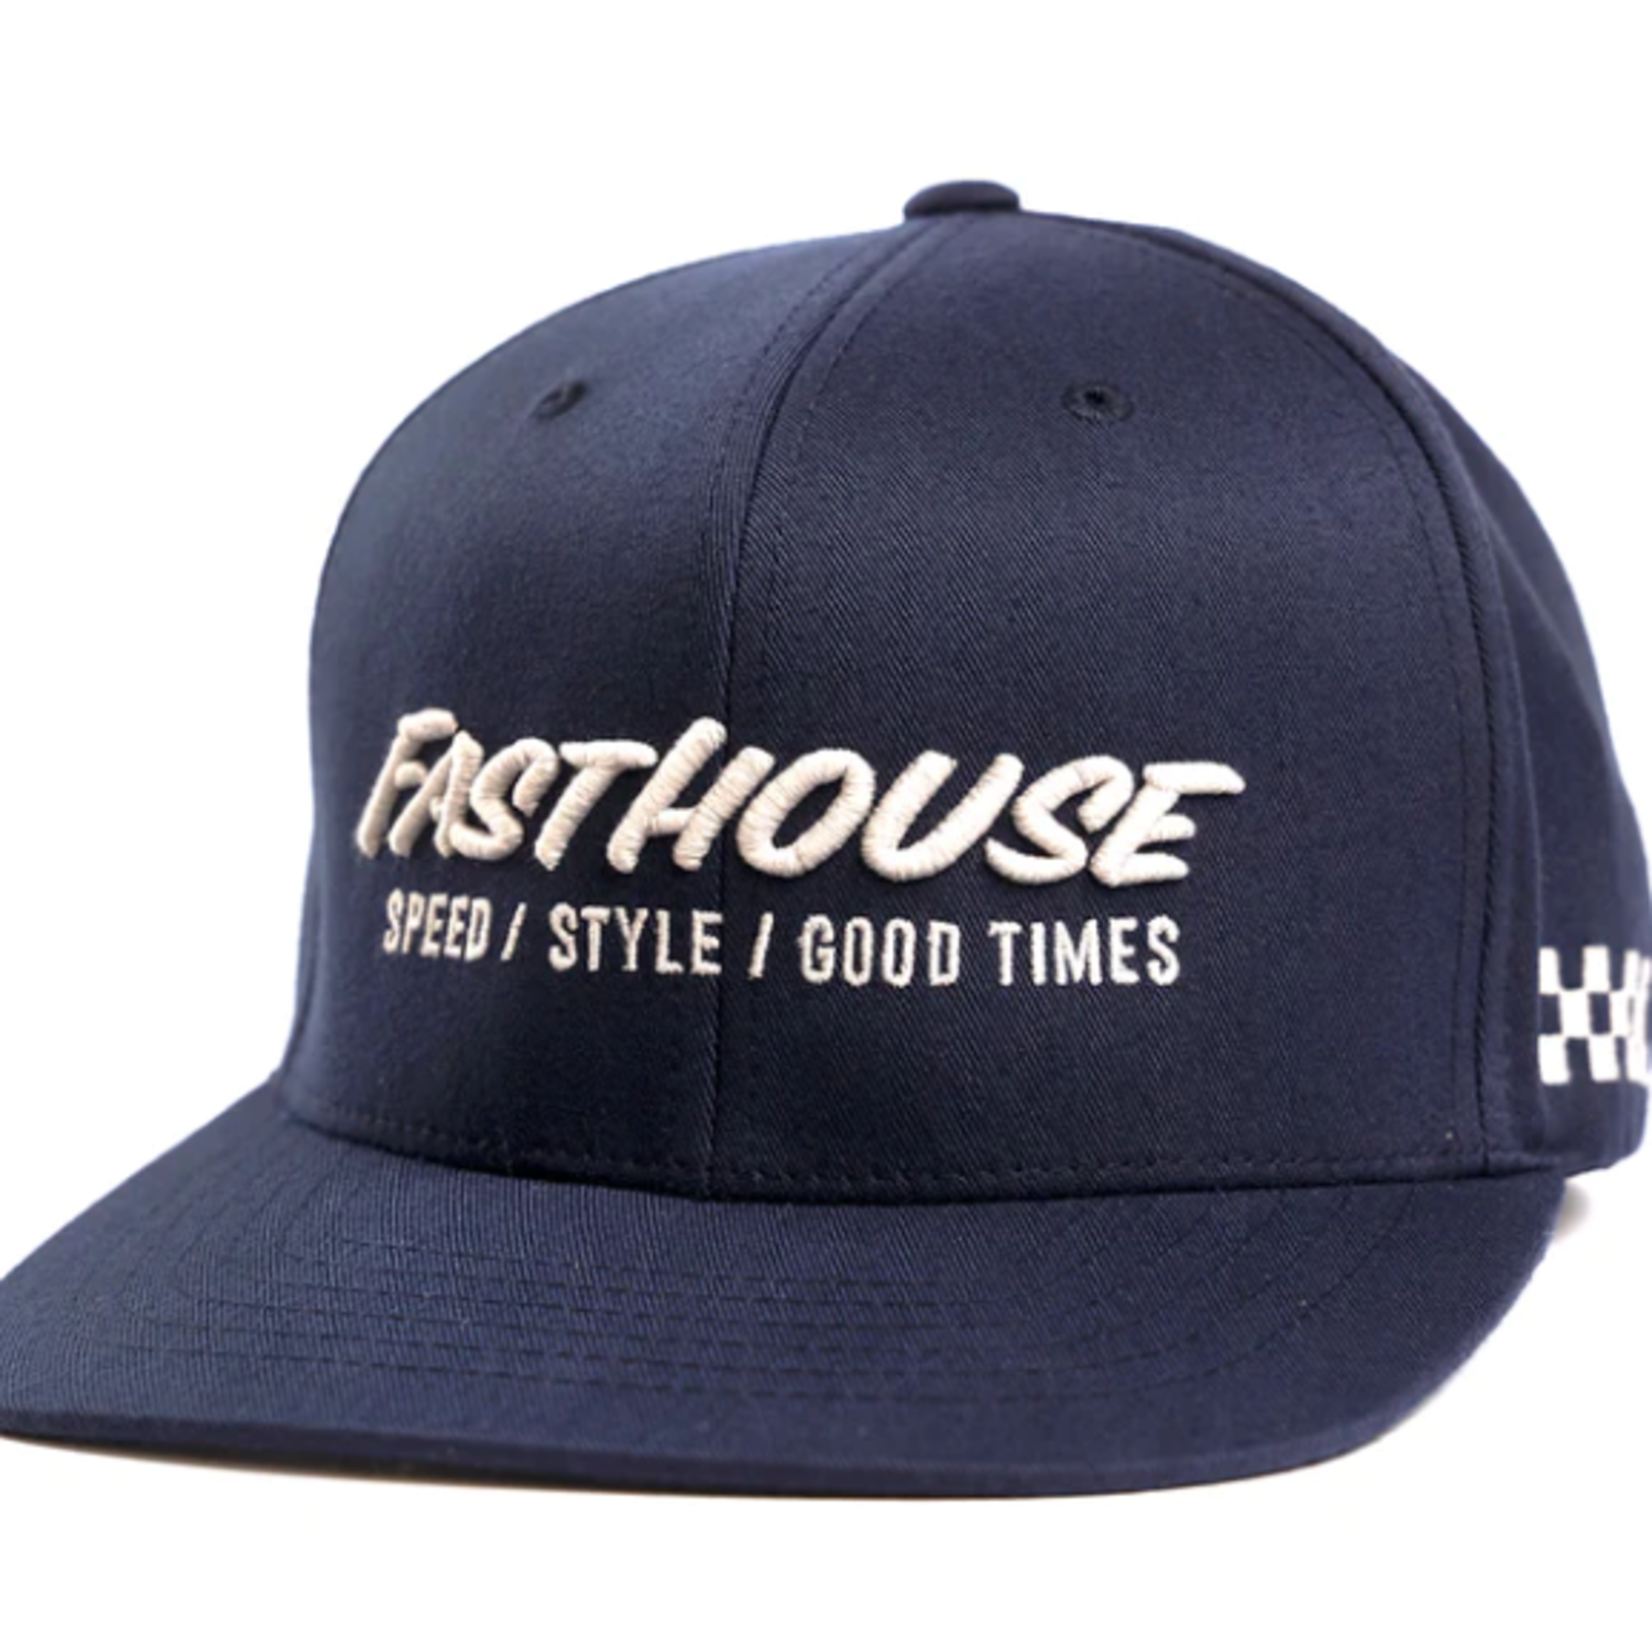 FASTHOUSE CLASSIC FITTED HAT, NAVY - SM/MD